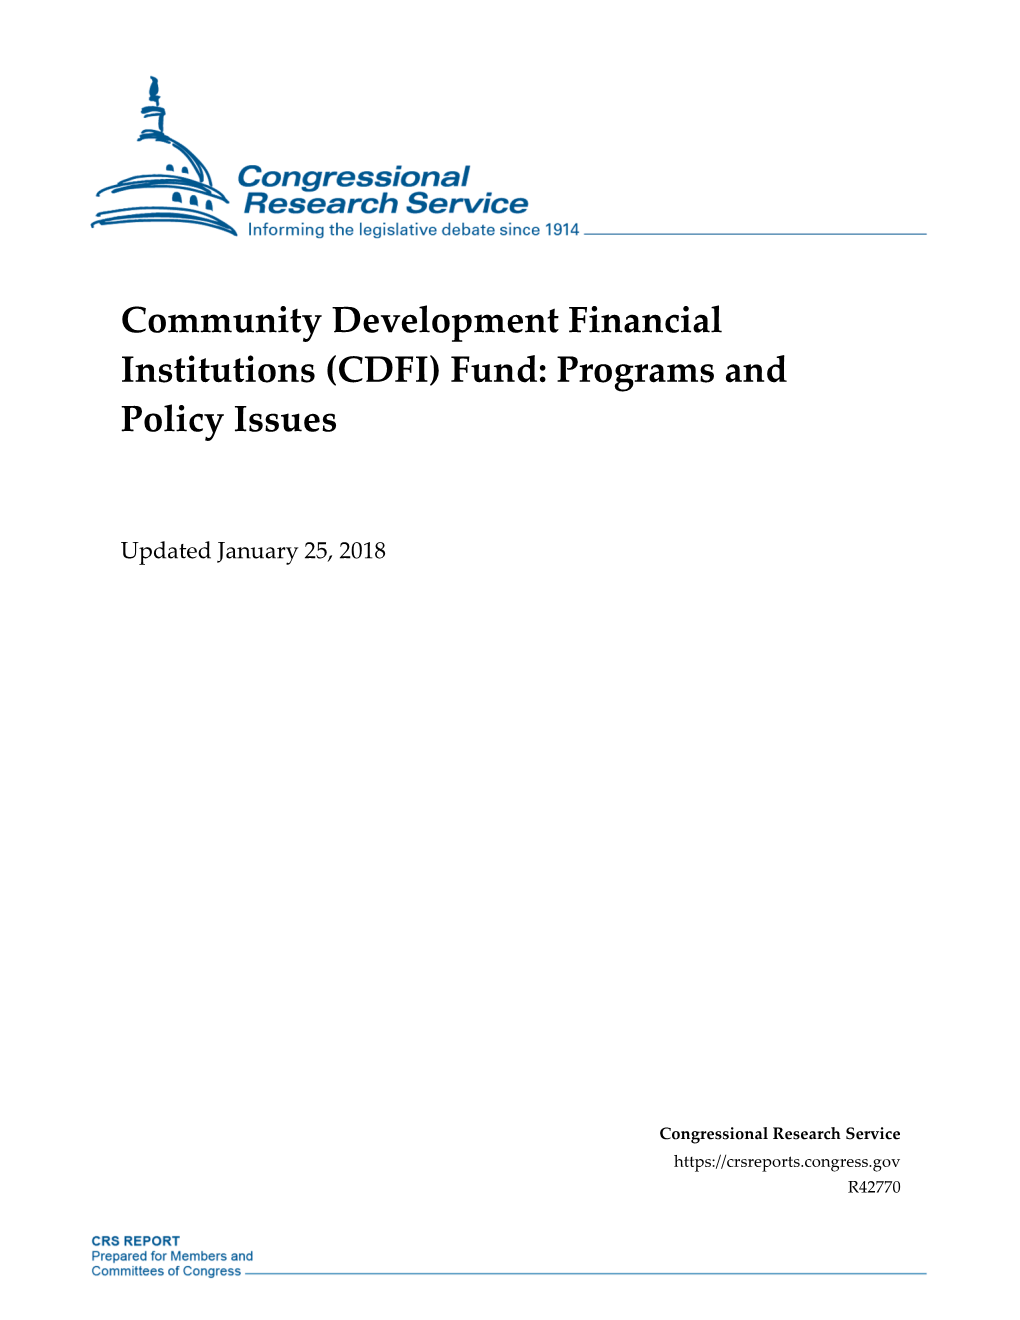 Community Development Financial Institutions (CDFI) Fund: Programs and Policy Issues